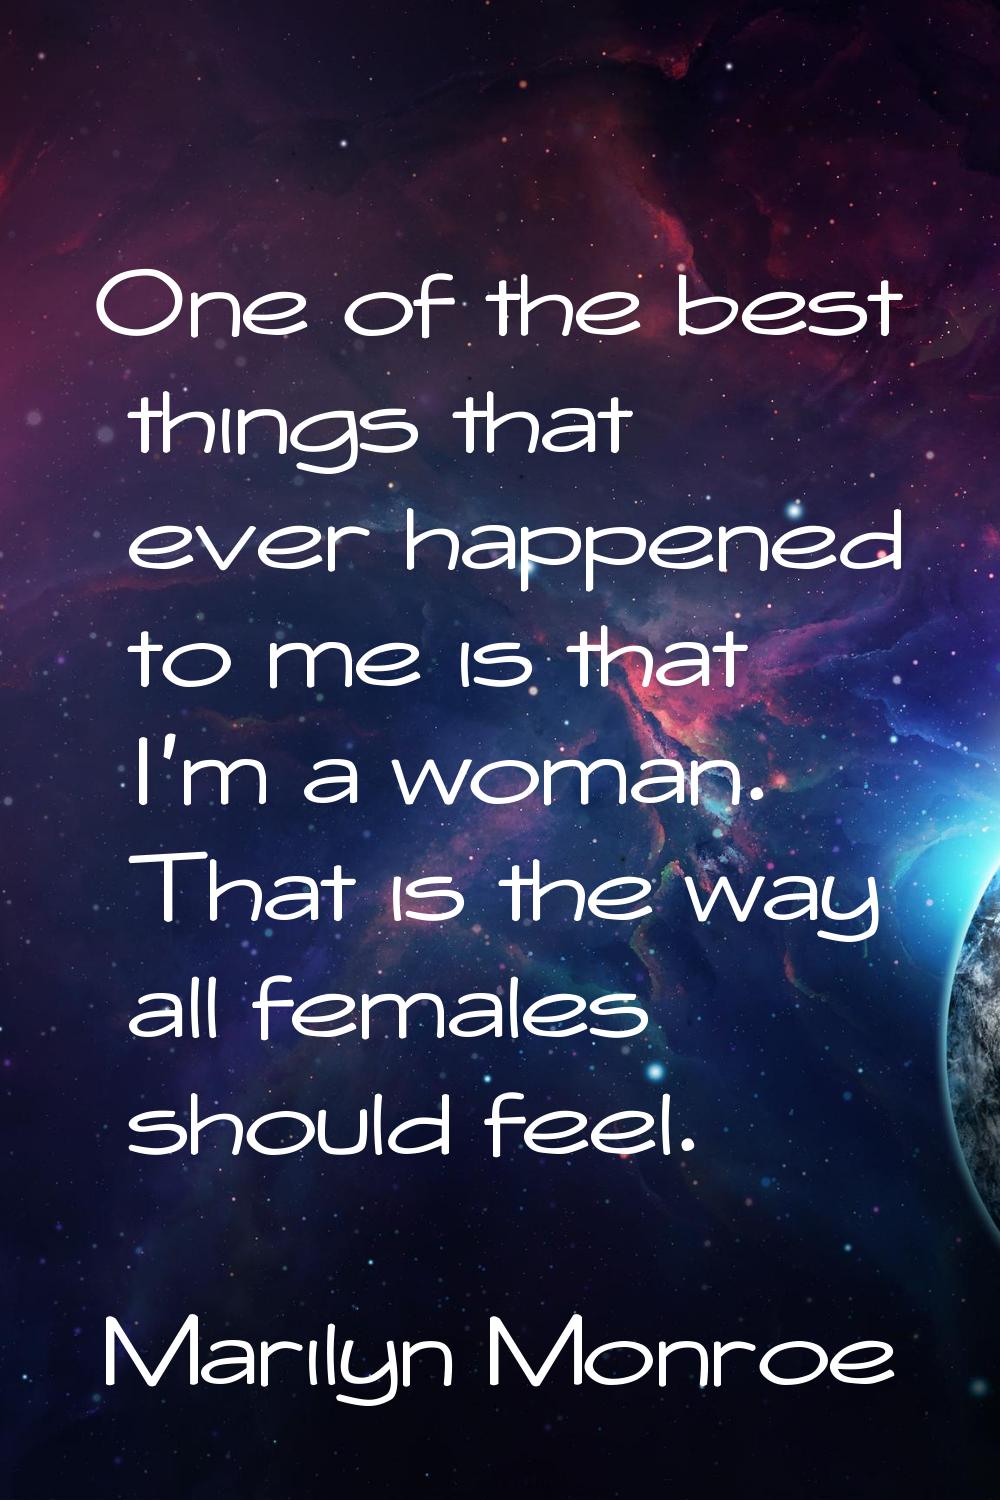 One of the best things that ever happened to me is that I'm a woman. That is the way all females sh